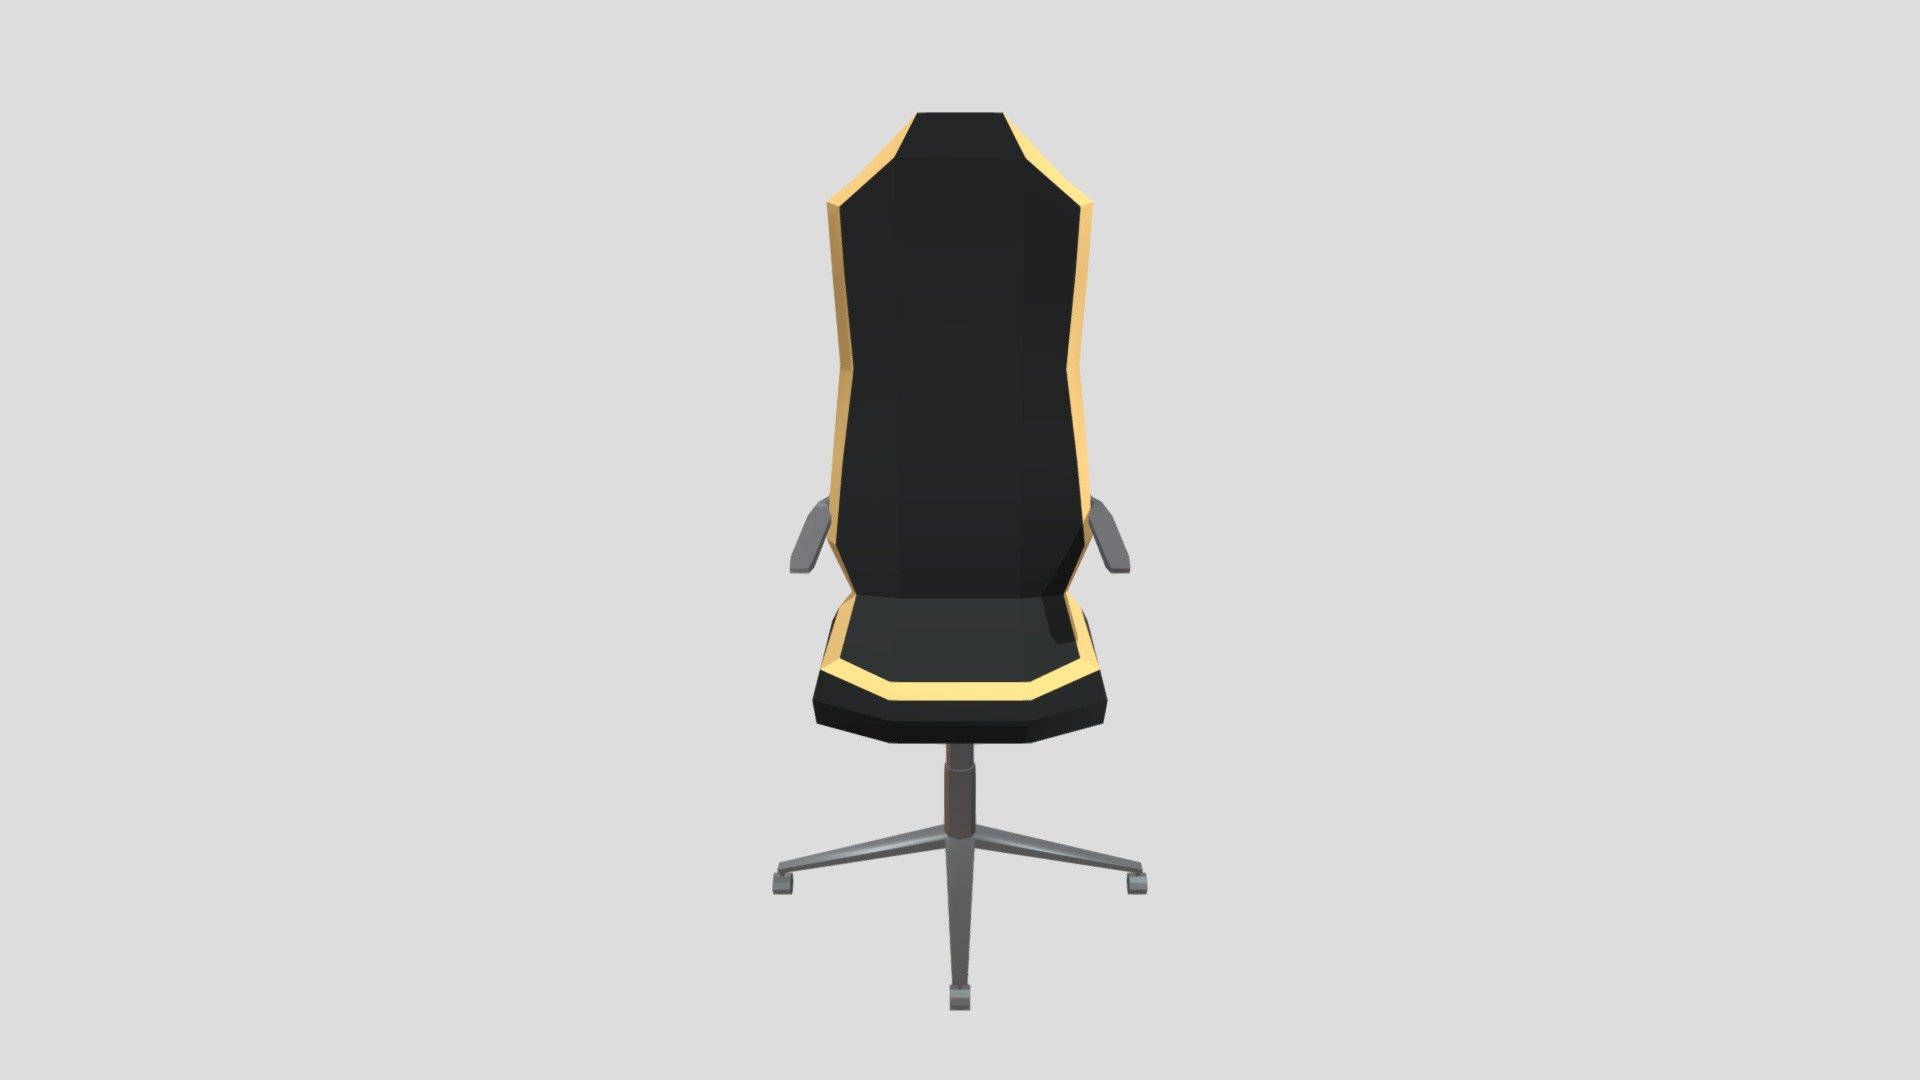 A simple, low-poly gaming/office chair with a unique armrest design 3d model